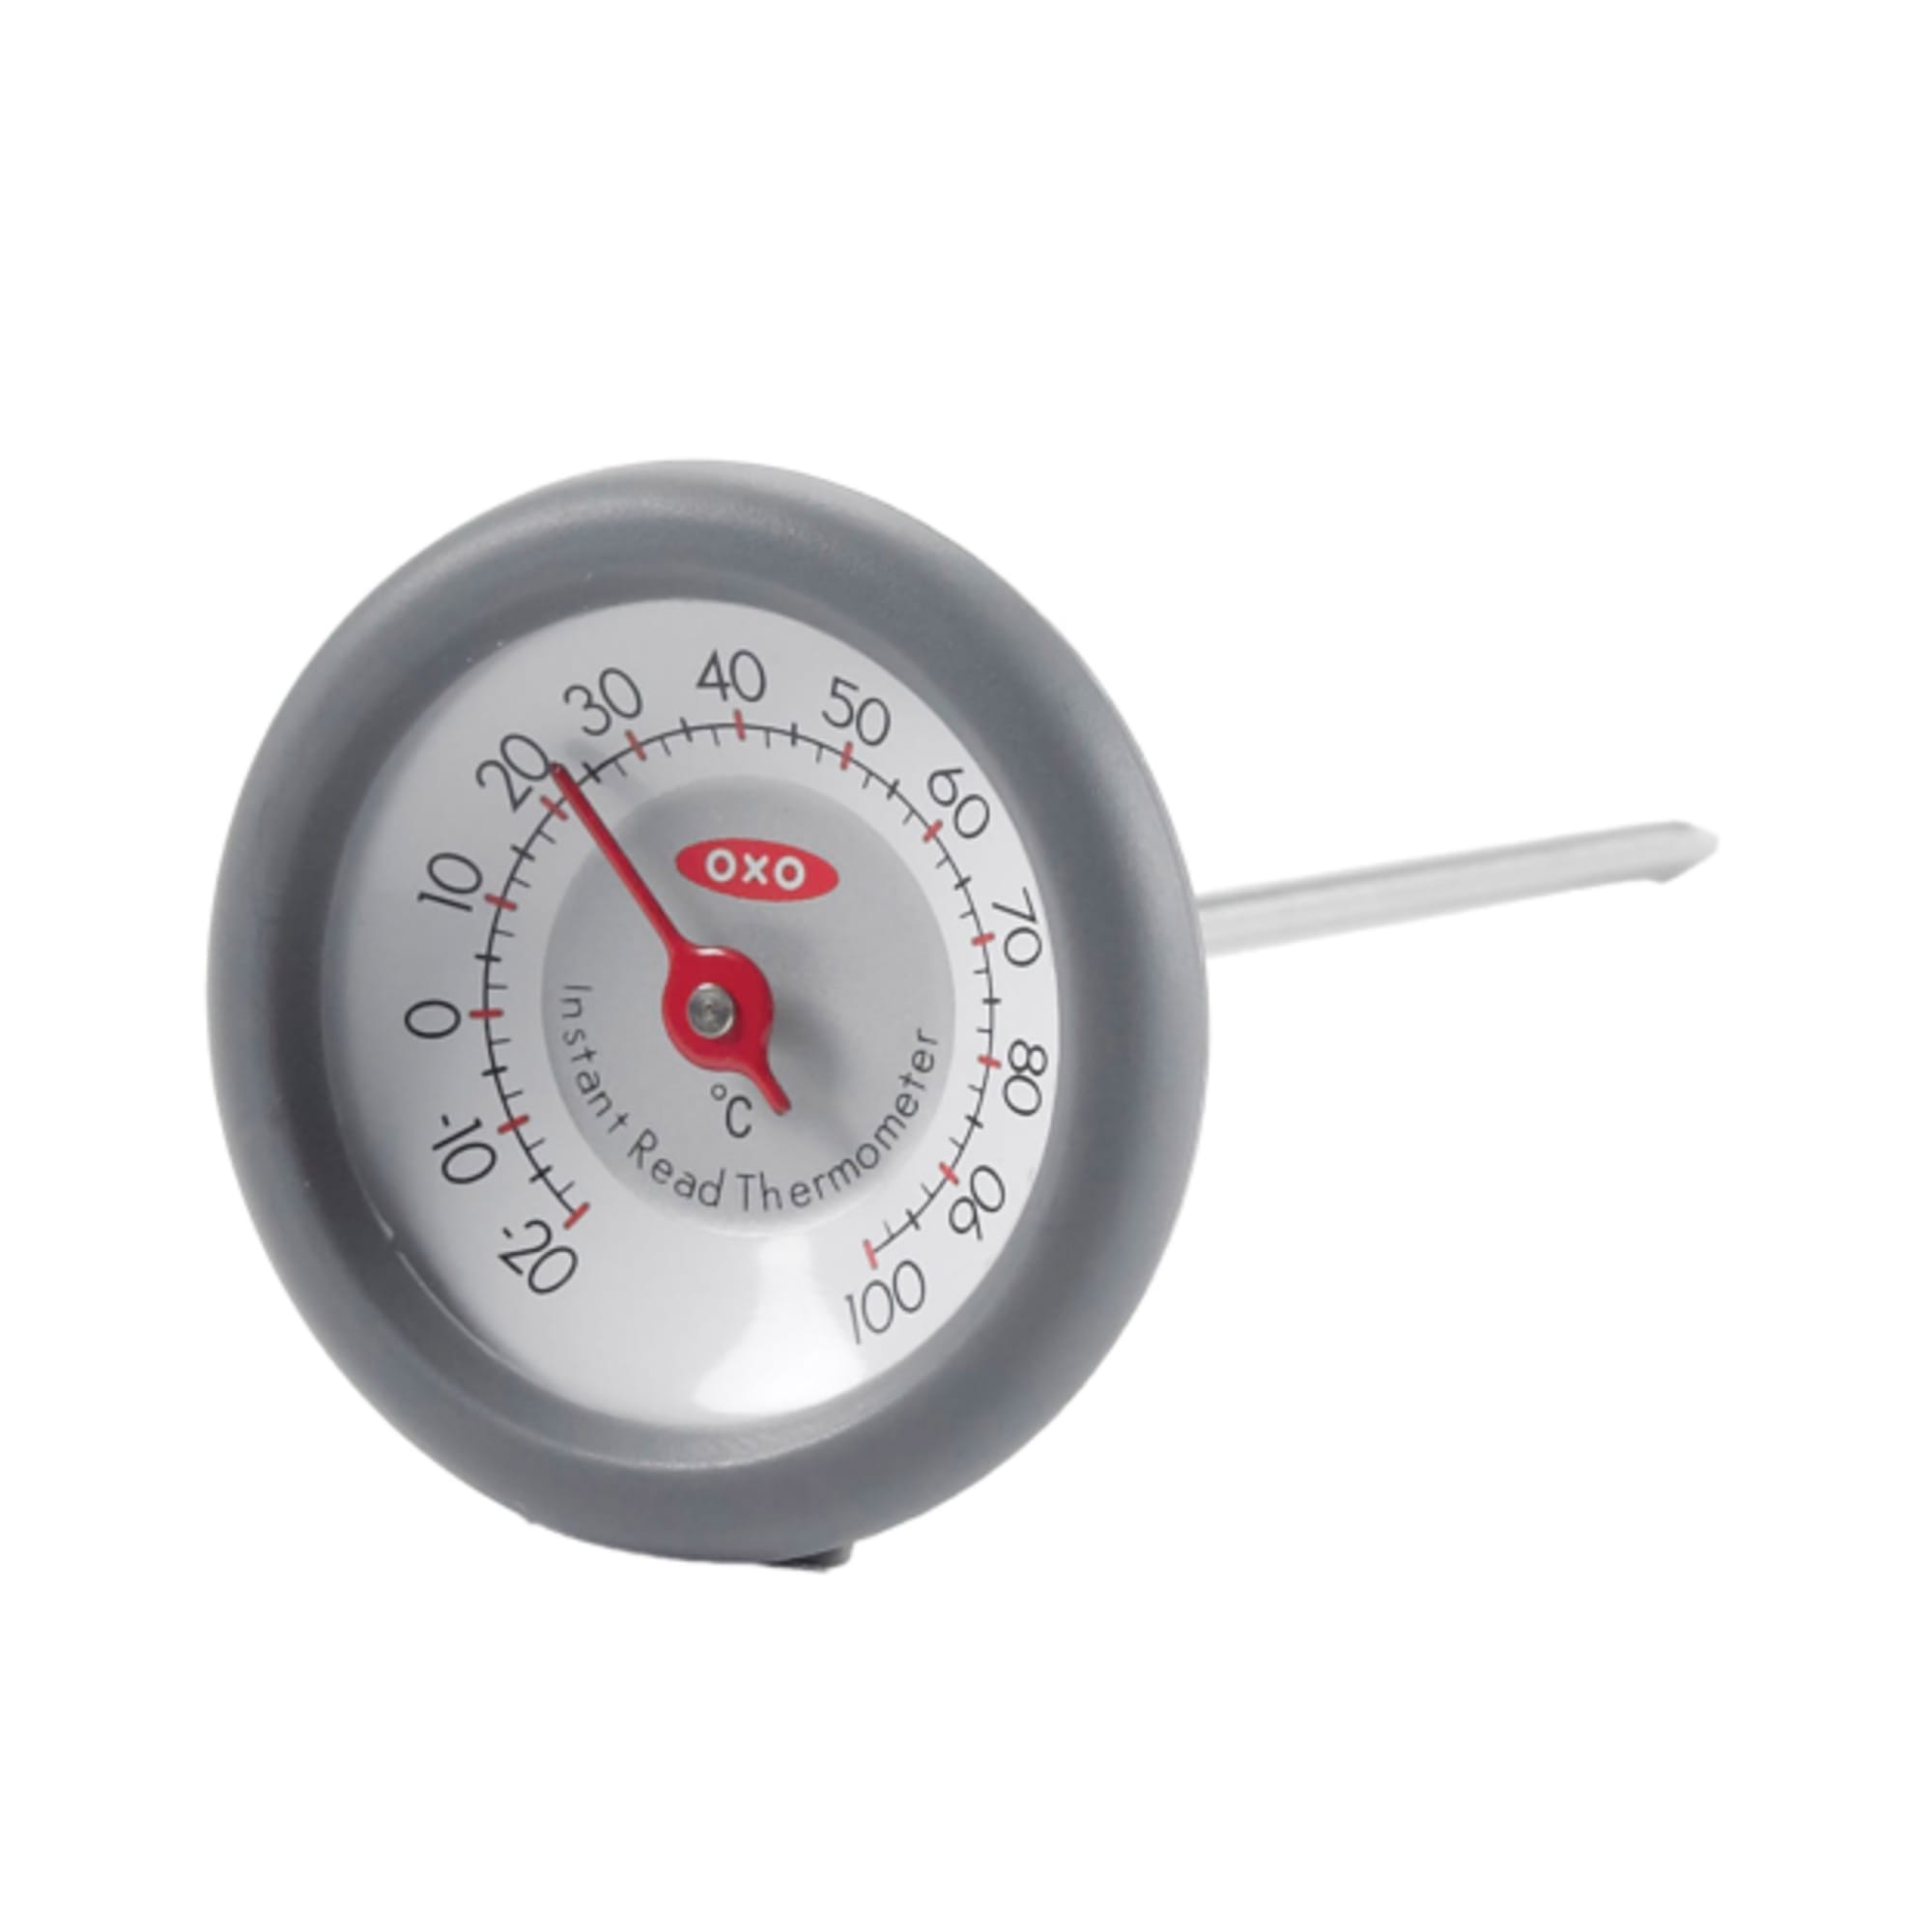 Polder Digital In-Oven Thermometer/Timer, Graphite Color with